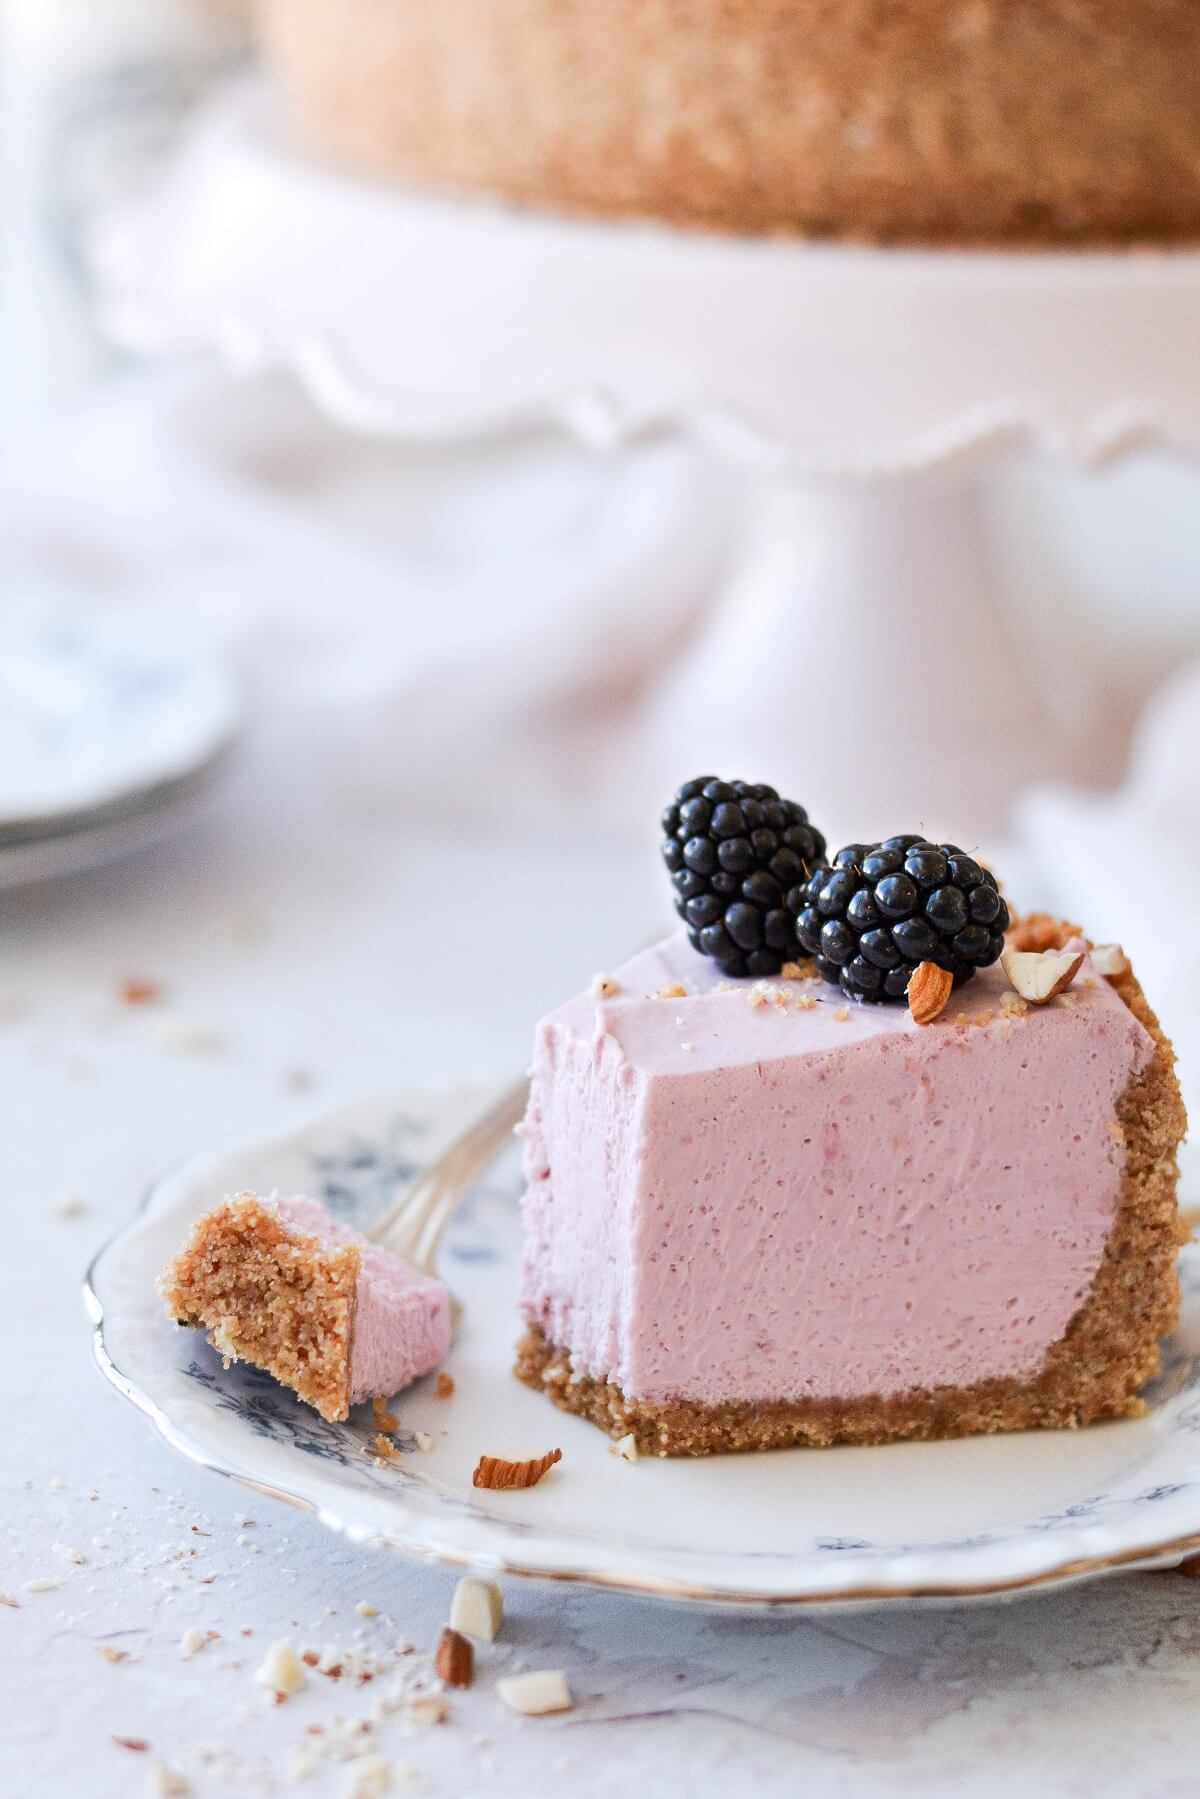 A slice of no bake blackberry cheesecake, topped with blackberries.